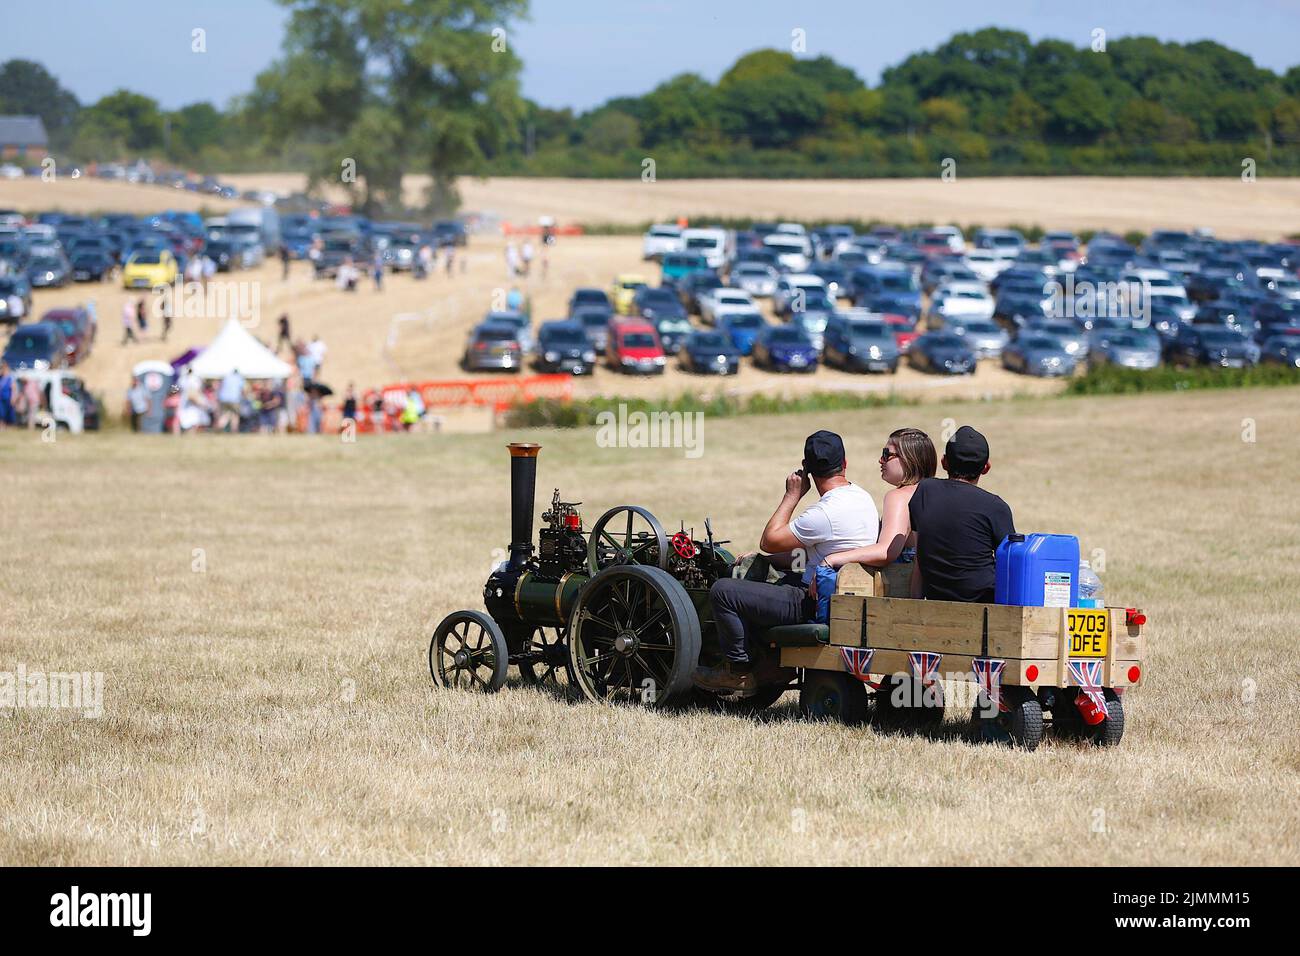 Woodchurch, Kent, UK. 07 August, 2022. On a hot and sunny day in the Kent countryside thousands of people arrive at one of the largest steam rally events in the south east. A mini steam engine looks on at the arrival of more visitors. Photo Credit: Paul Lawrenson/Alamy Live News Stock Photo